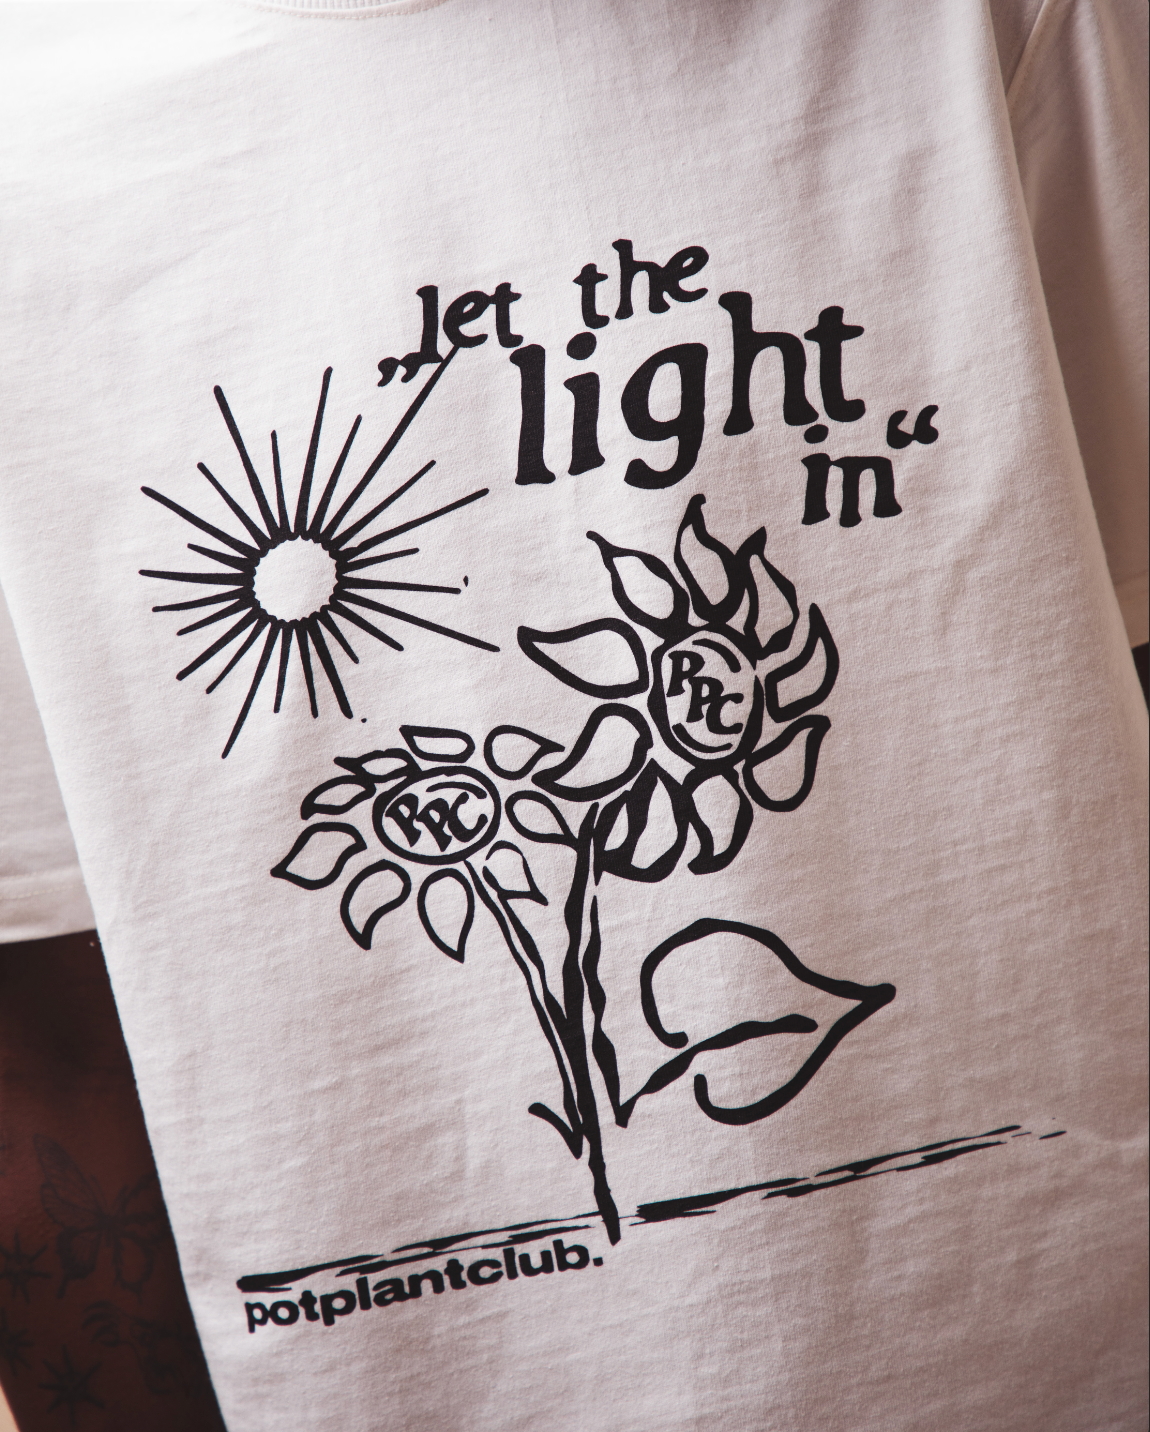 Pot Plant Club "Let The Light In" T-shirt - Cream